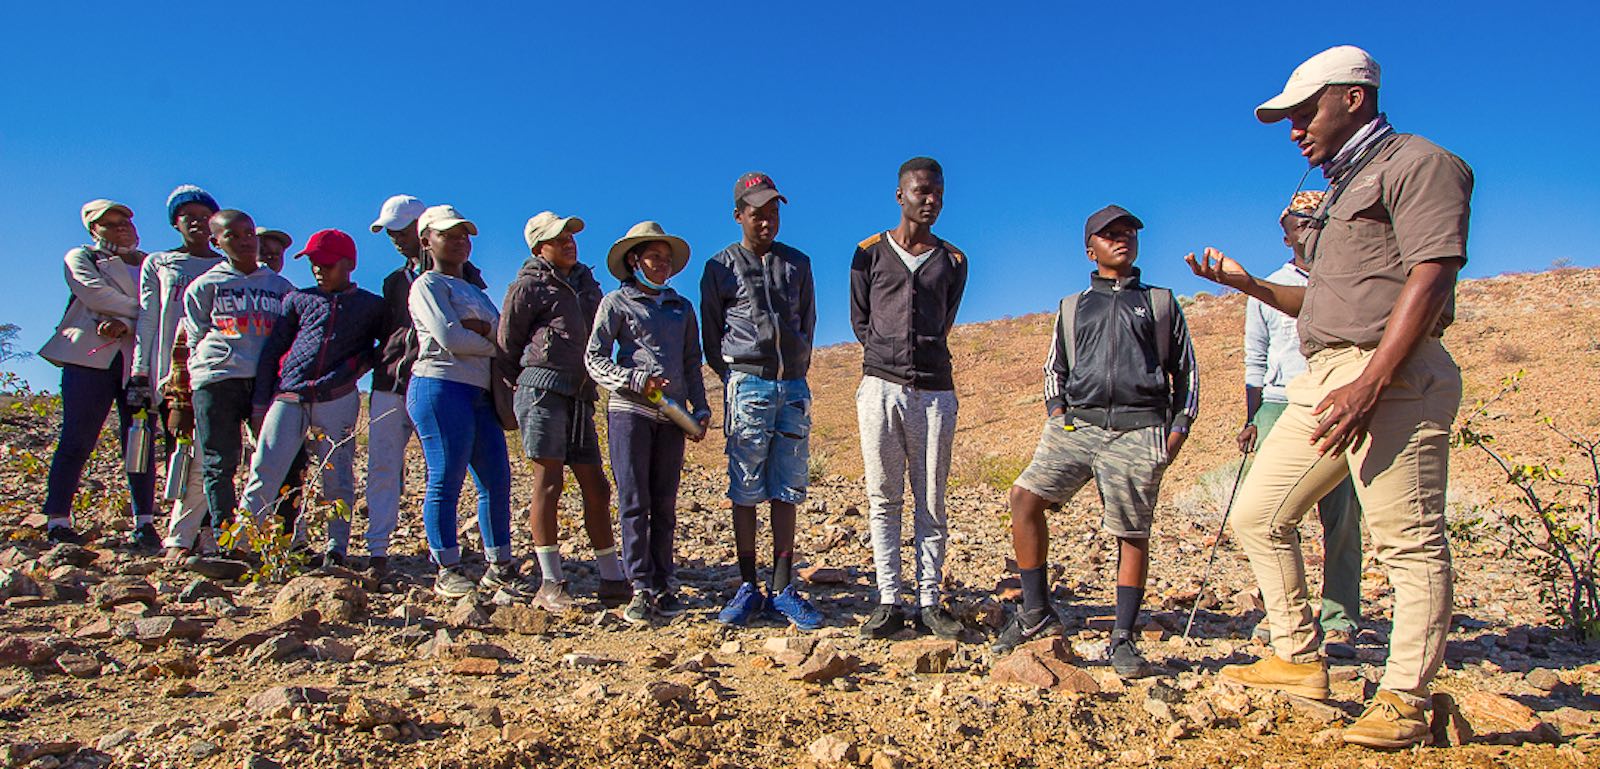 A group of Namibian children listen to a local guide.